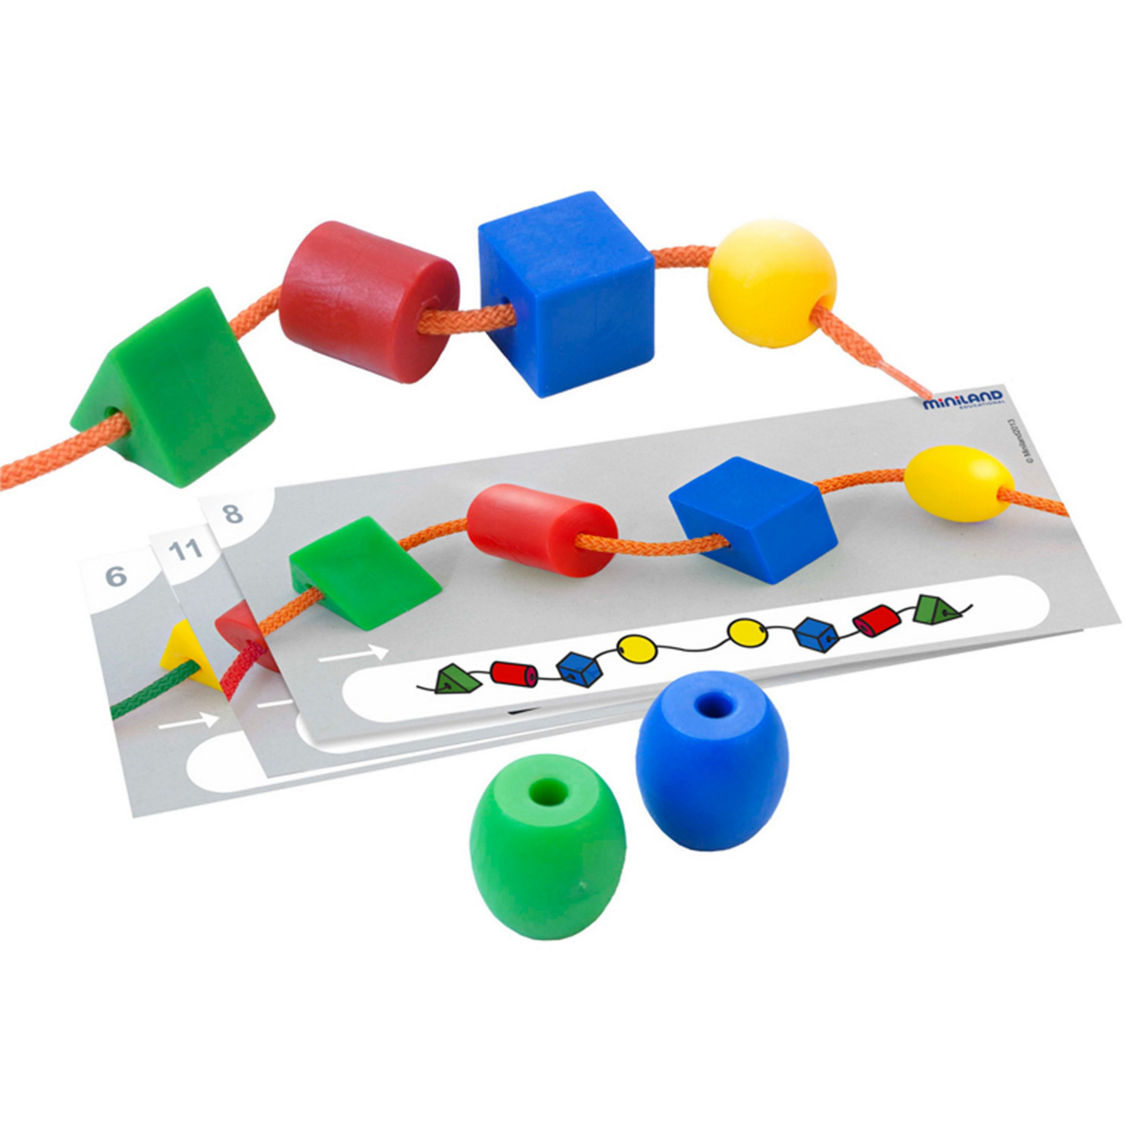 Miniland Educational Activity Shapes, Giant Beads and Laces Set - Image 2 of 3